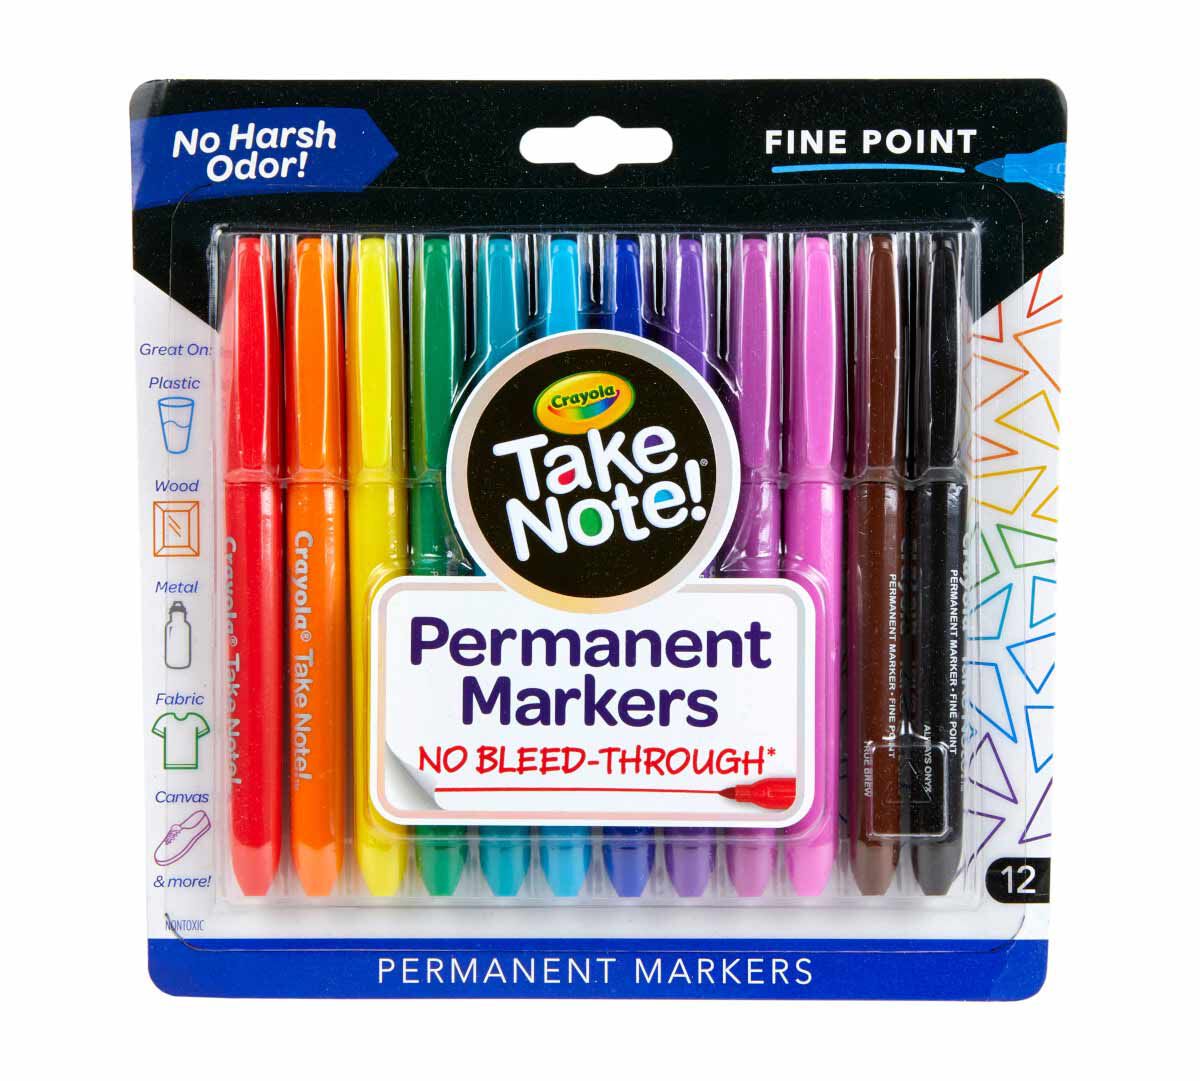 Fine Point School Supplies Assorted Colors Crayola Take Note Permanent Marker 12 Count 